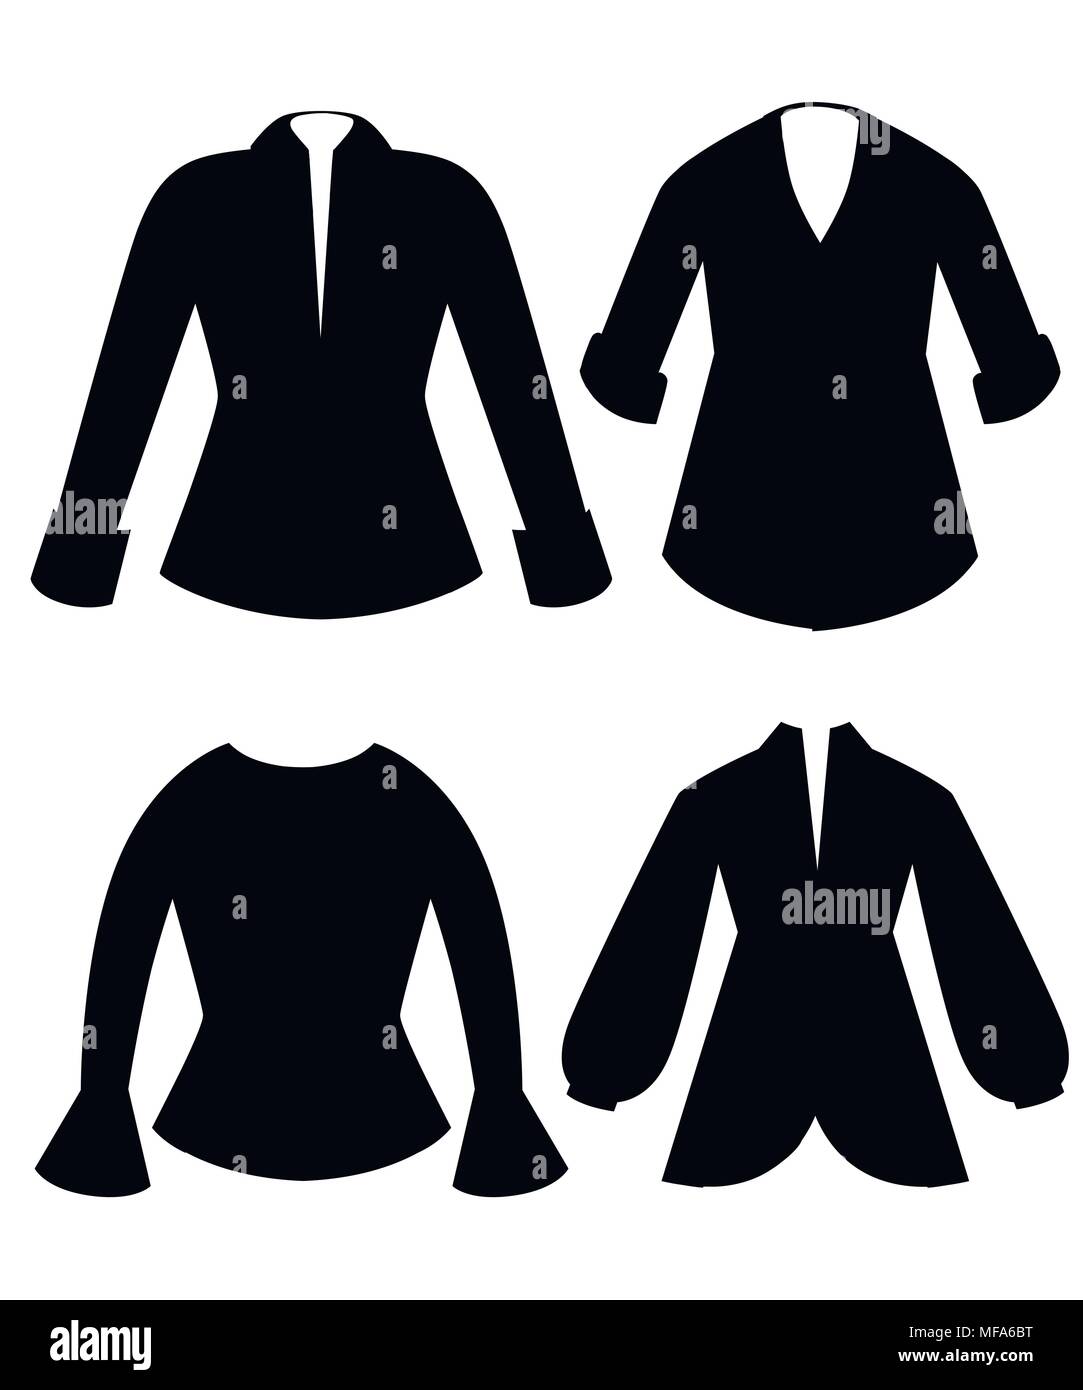 Black silhouette. Set of blouses. Clothes for lady. Female formal long sleeved blouses. Flat style design. Vector illustration isolated on white backg Stock Vector